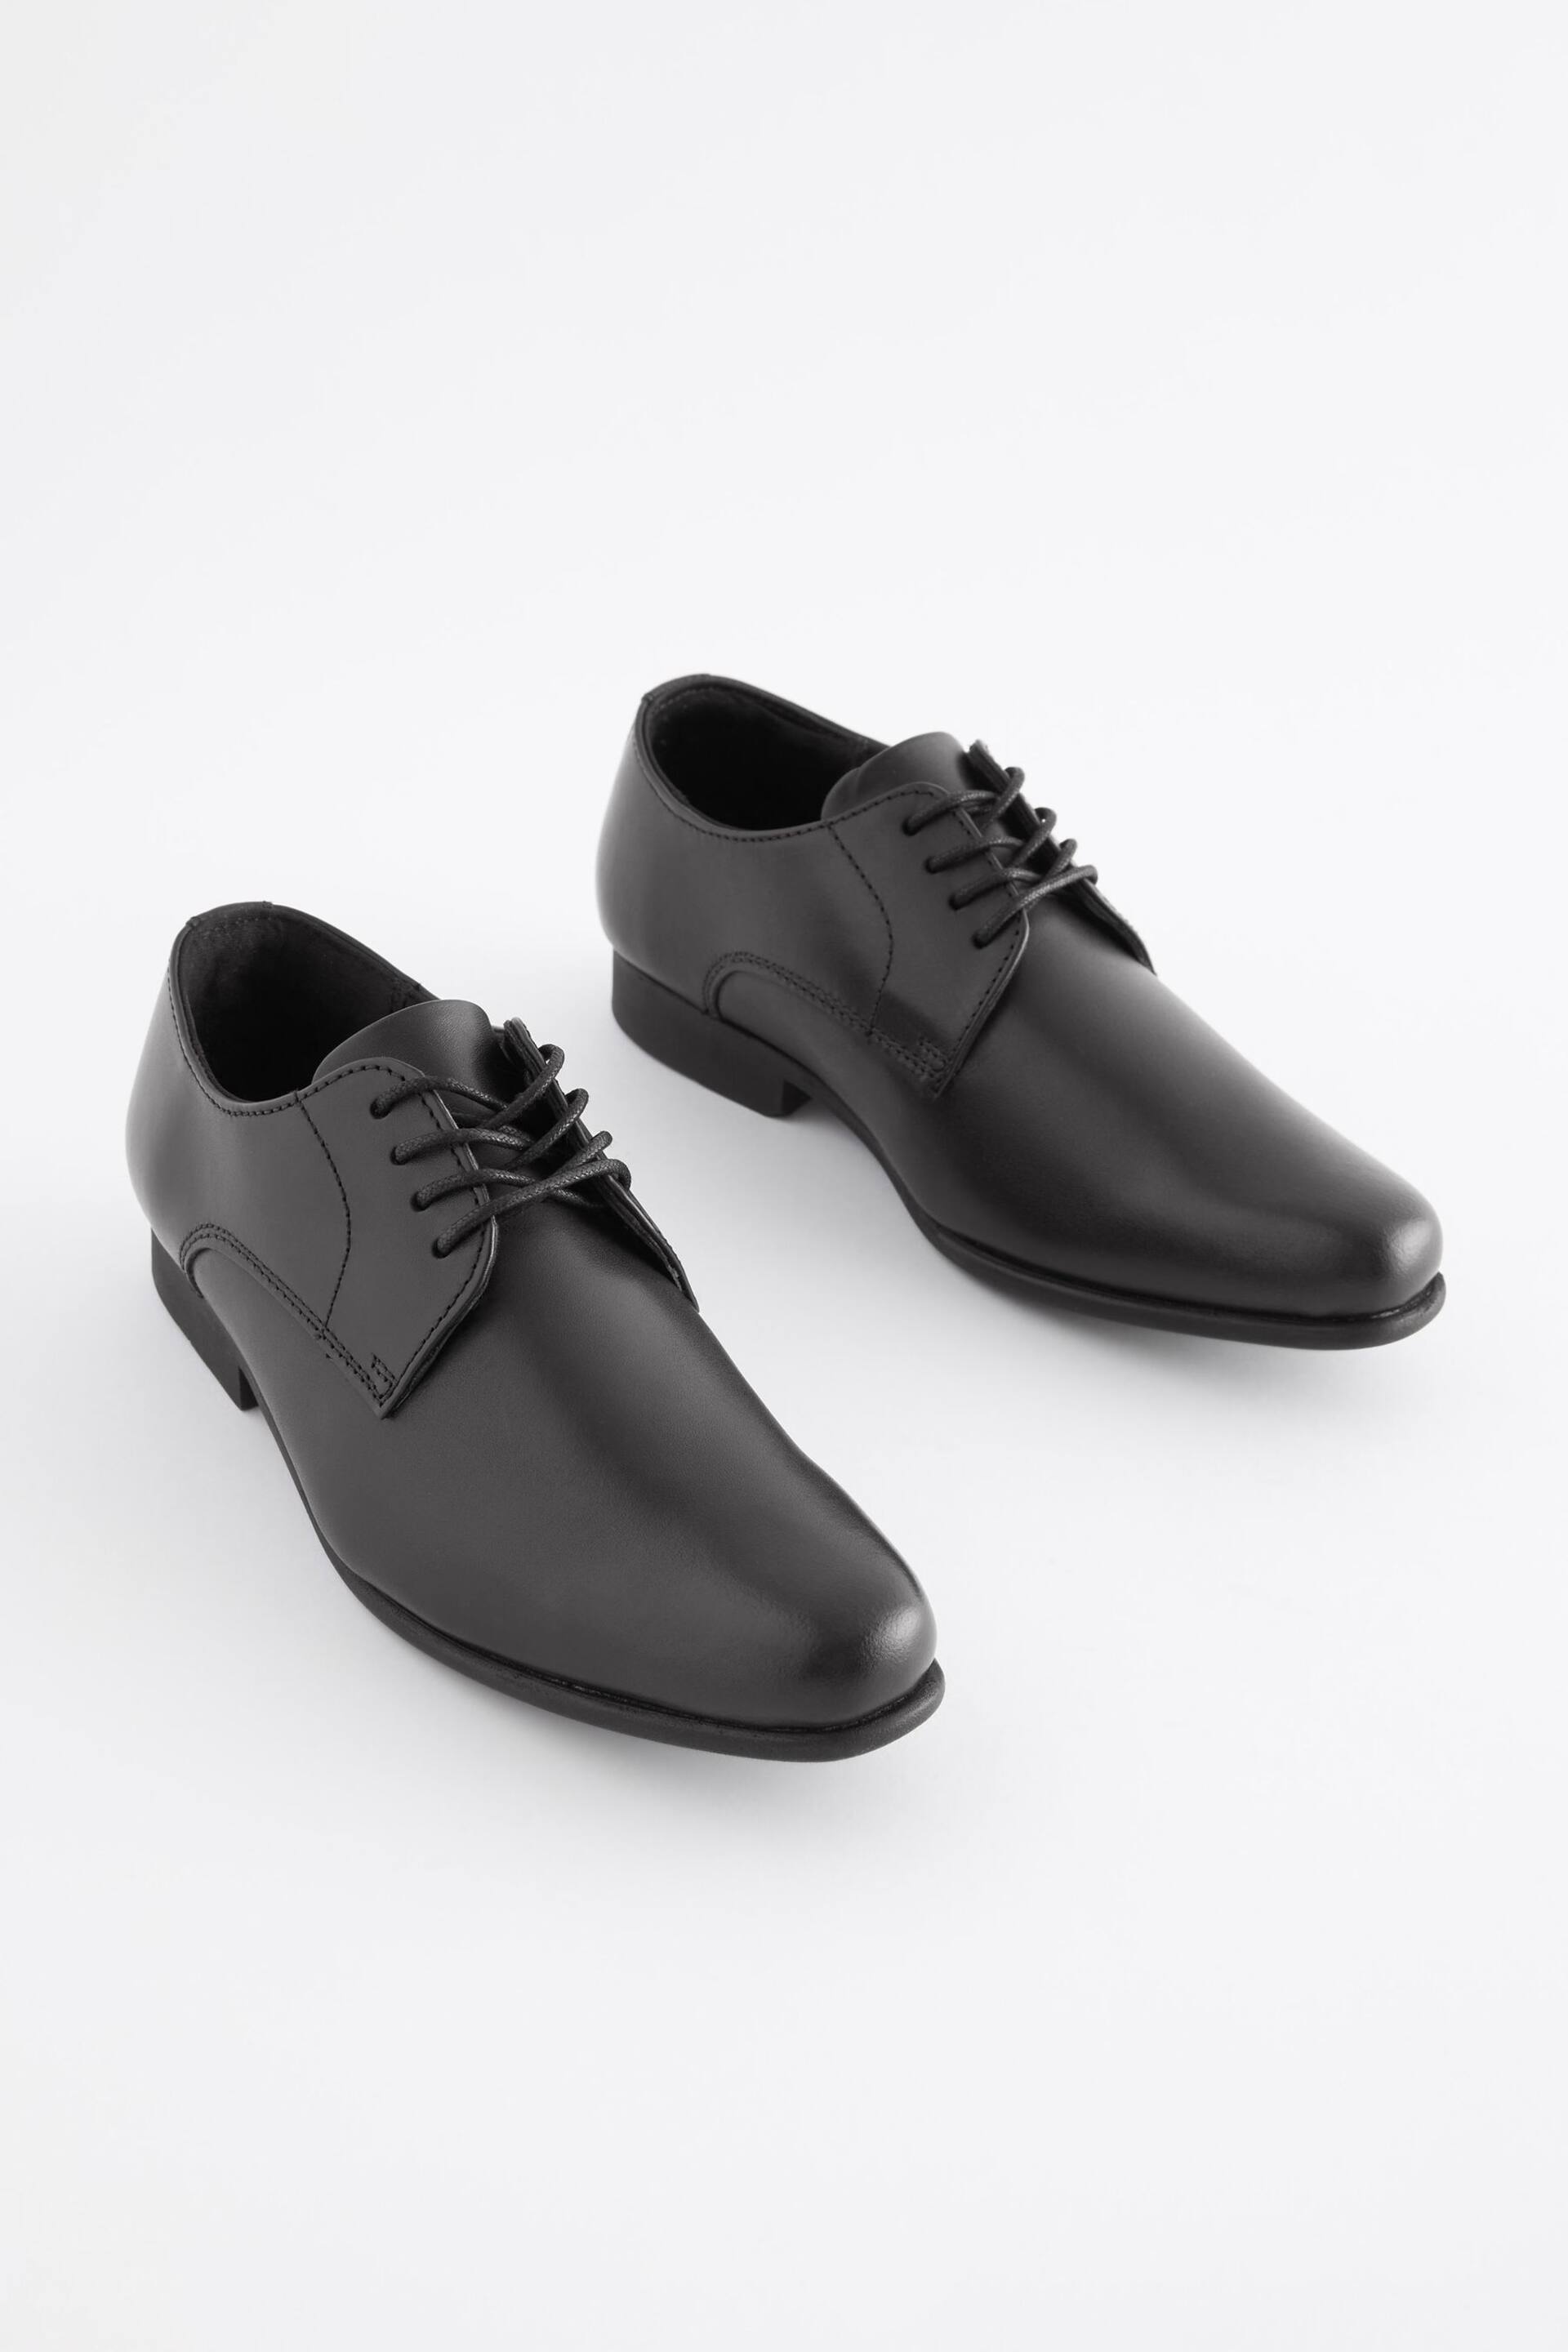 Black Wide Fit (G) School Leather Lace Up Shoes - Image 1 of 9